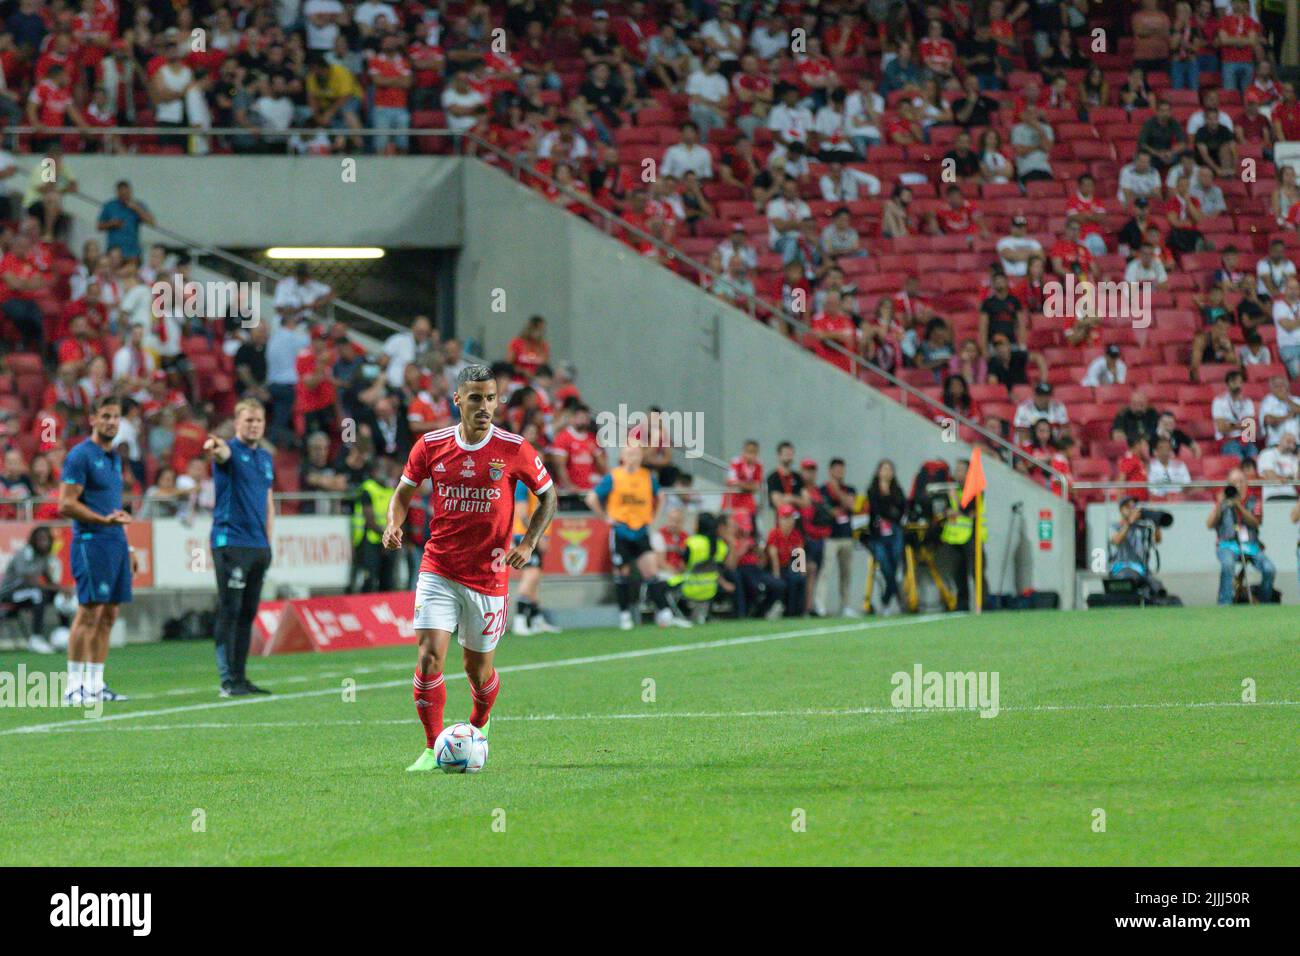 Lisbon, Portugal. July 26, 2022.  Benfica's midfielder from Portugal Chiquinho (22) in action during the friendly game between SL Benfica vs Newcastle United FC Credit: Alexandre de Sousa/Alamy Live News Stock Photo